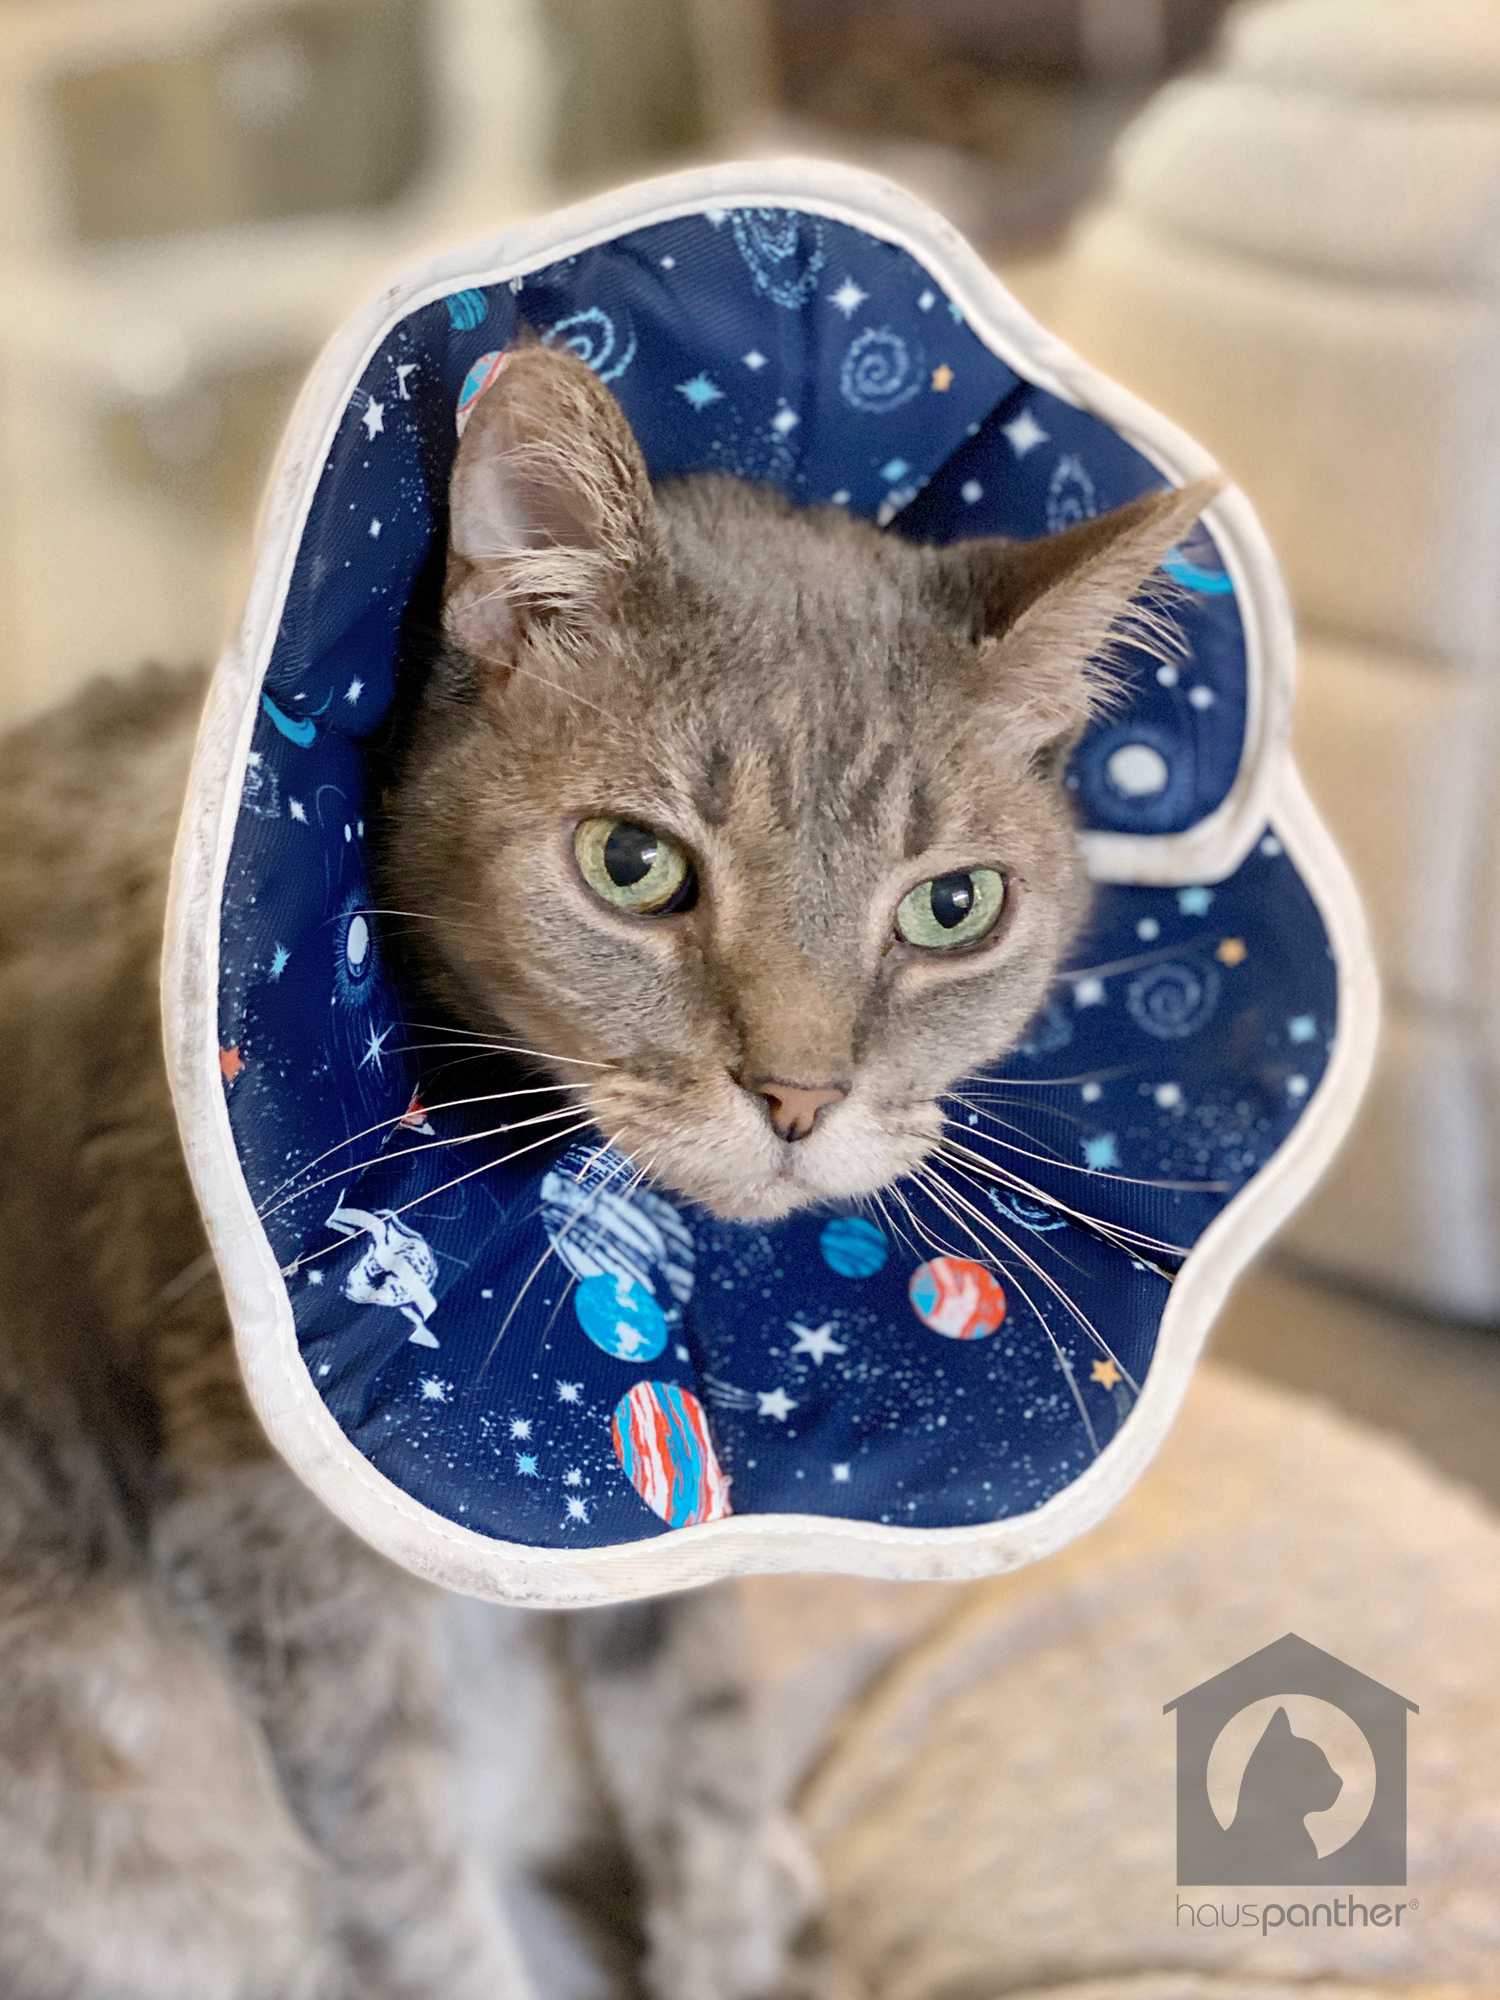 Cat wearing soft e-collar with space design